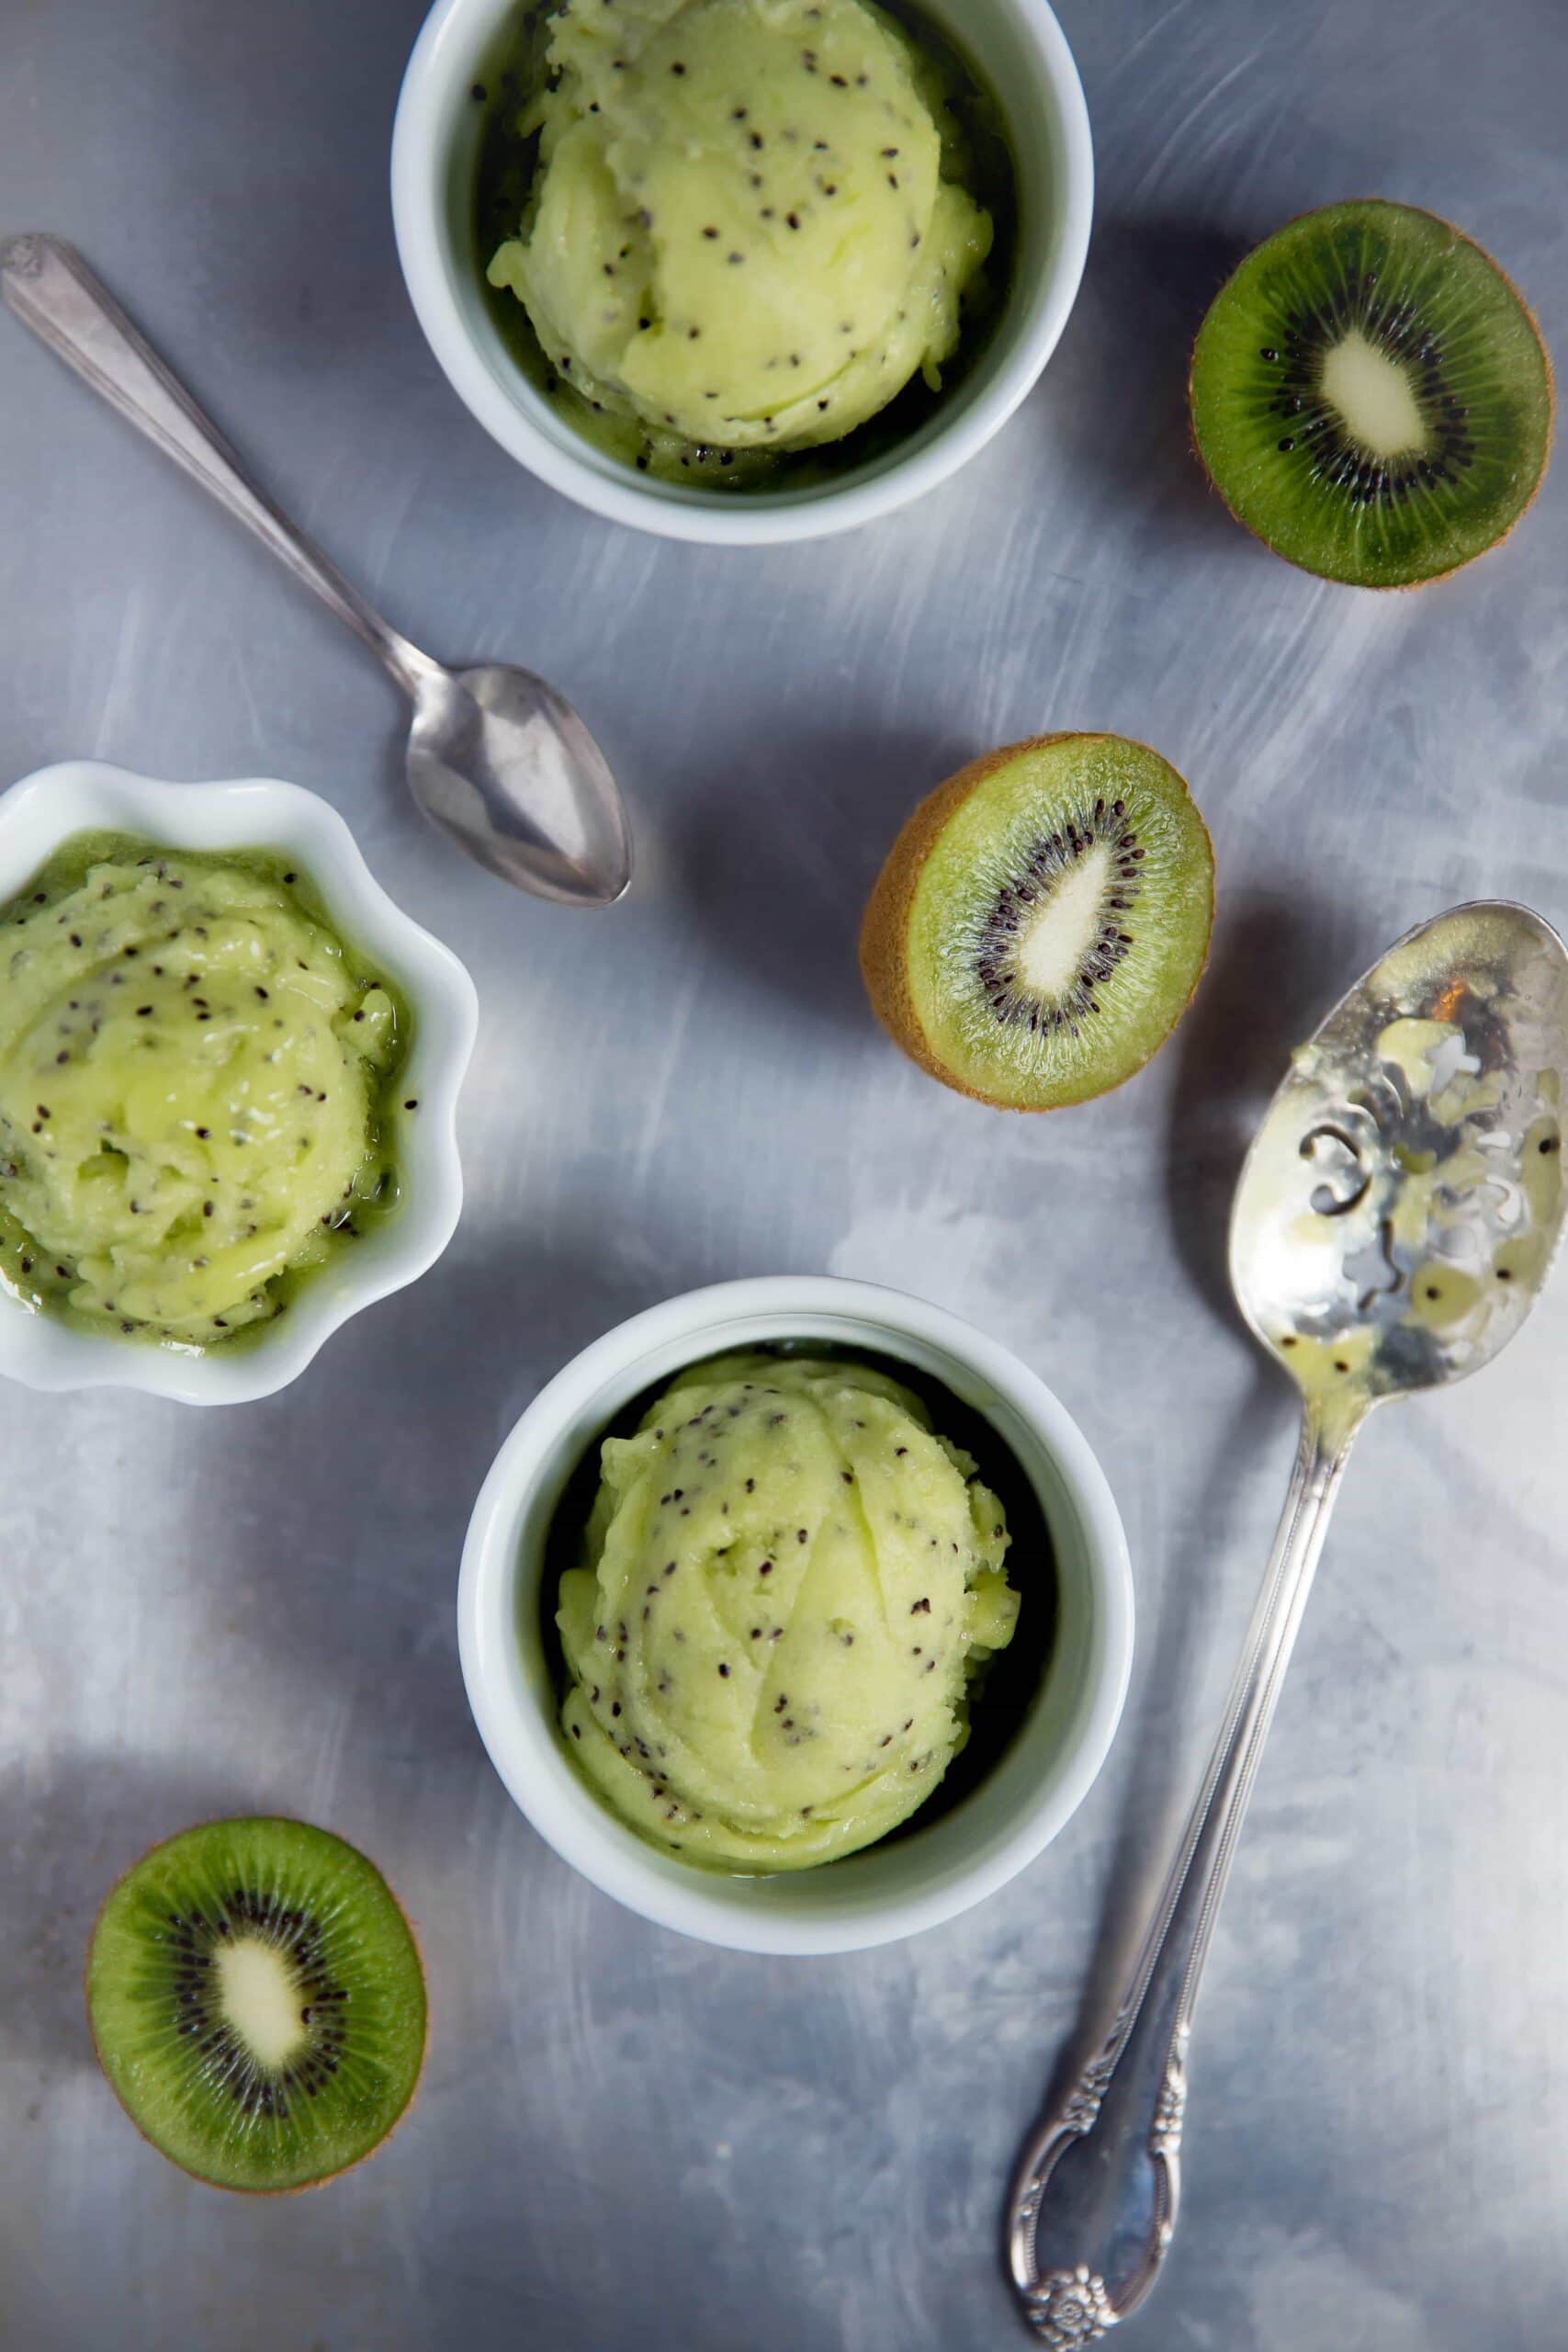 Refreshing Kiwi Lime Sorbet using just 3 ingredients! A mouthwatering treat perfect for summer and that bikini bod.